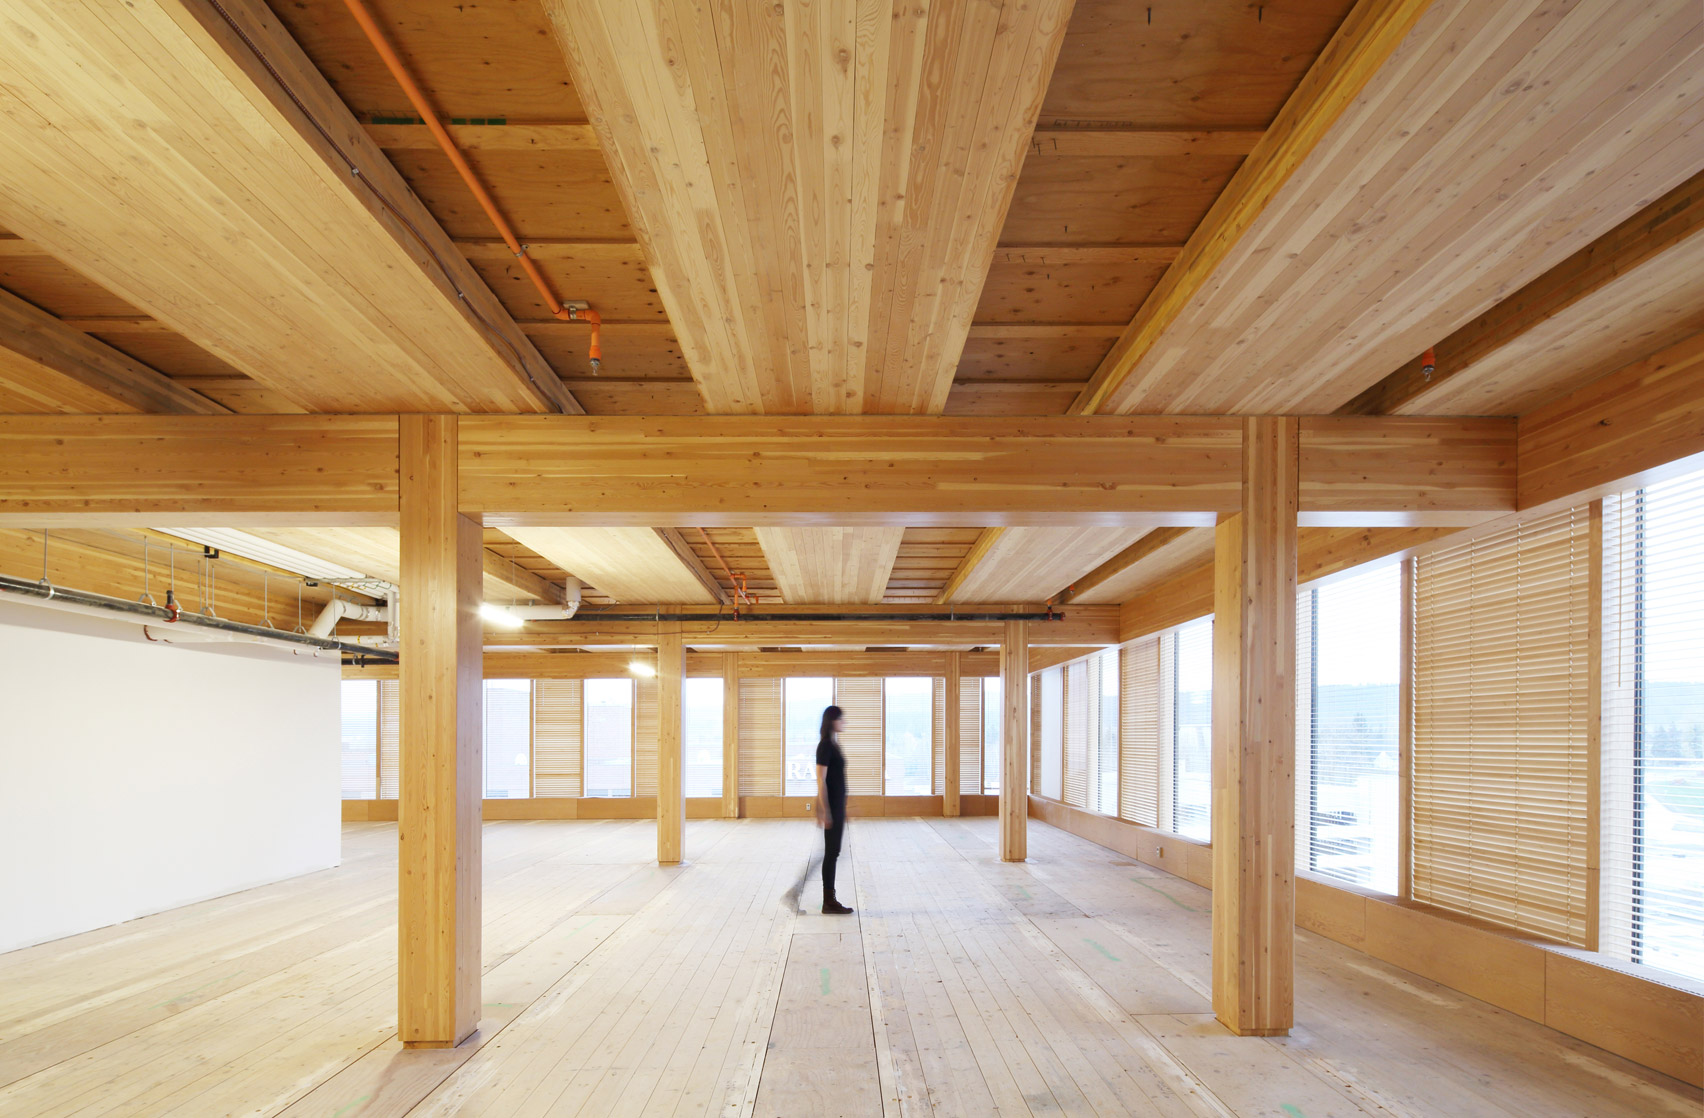 Dezeen promotion: Cross-laminated timber products by Katerra